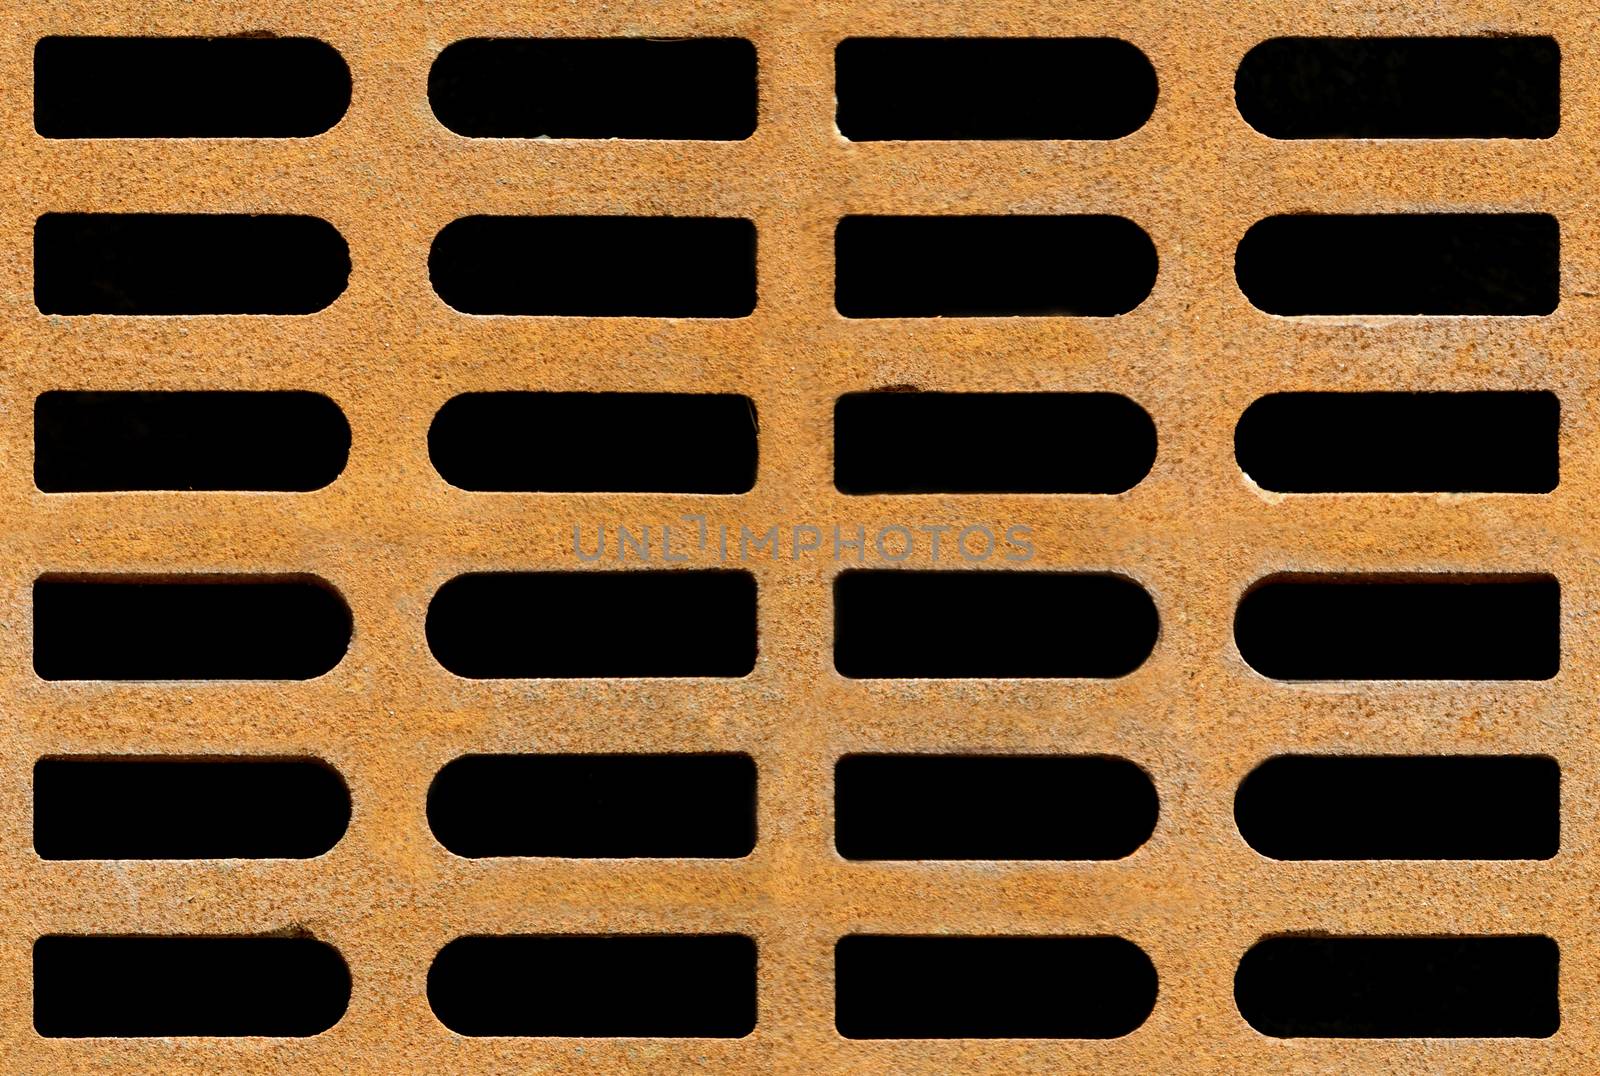 Rusty drain grate seamless background texture by Balefire9